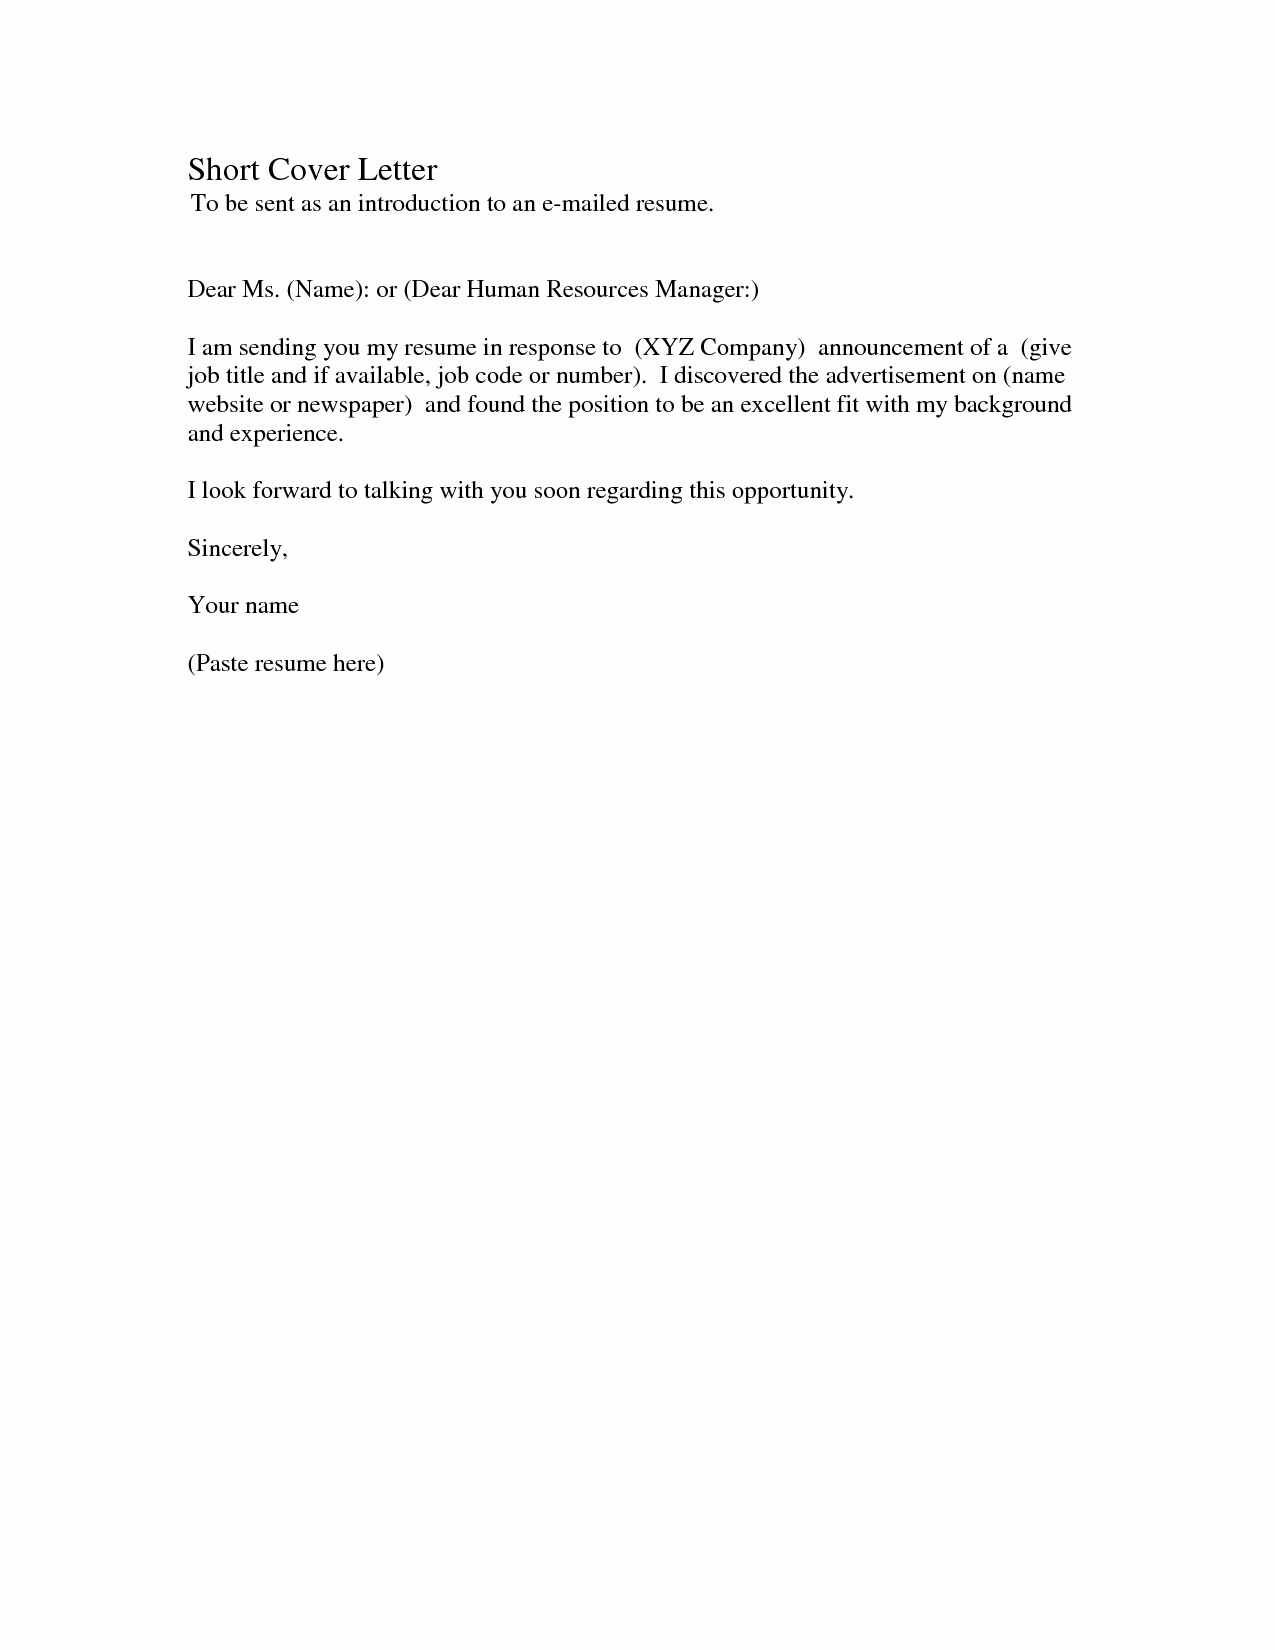 Short Cover Letter Sample Beautiful Best S Of Brief Cover Letter Sample Request